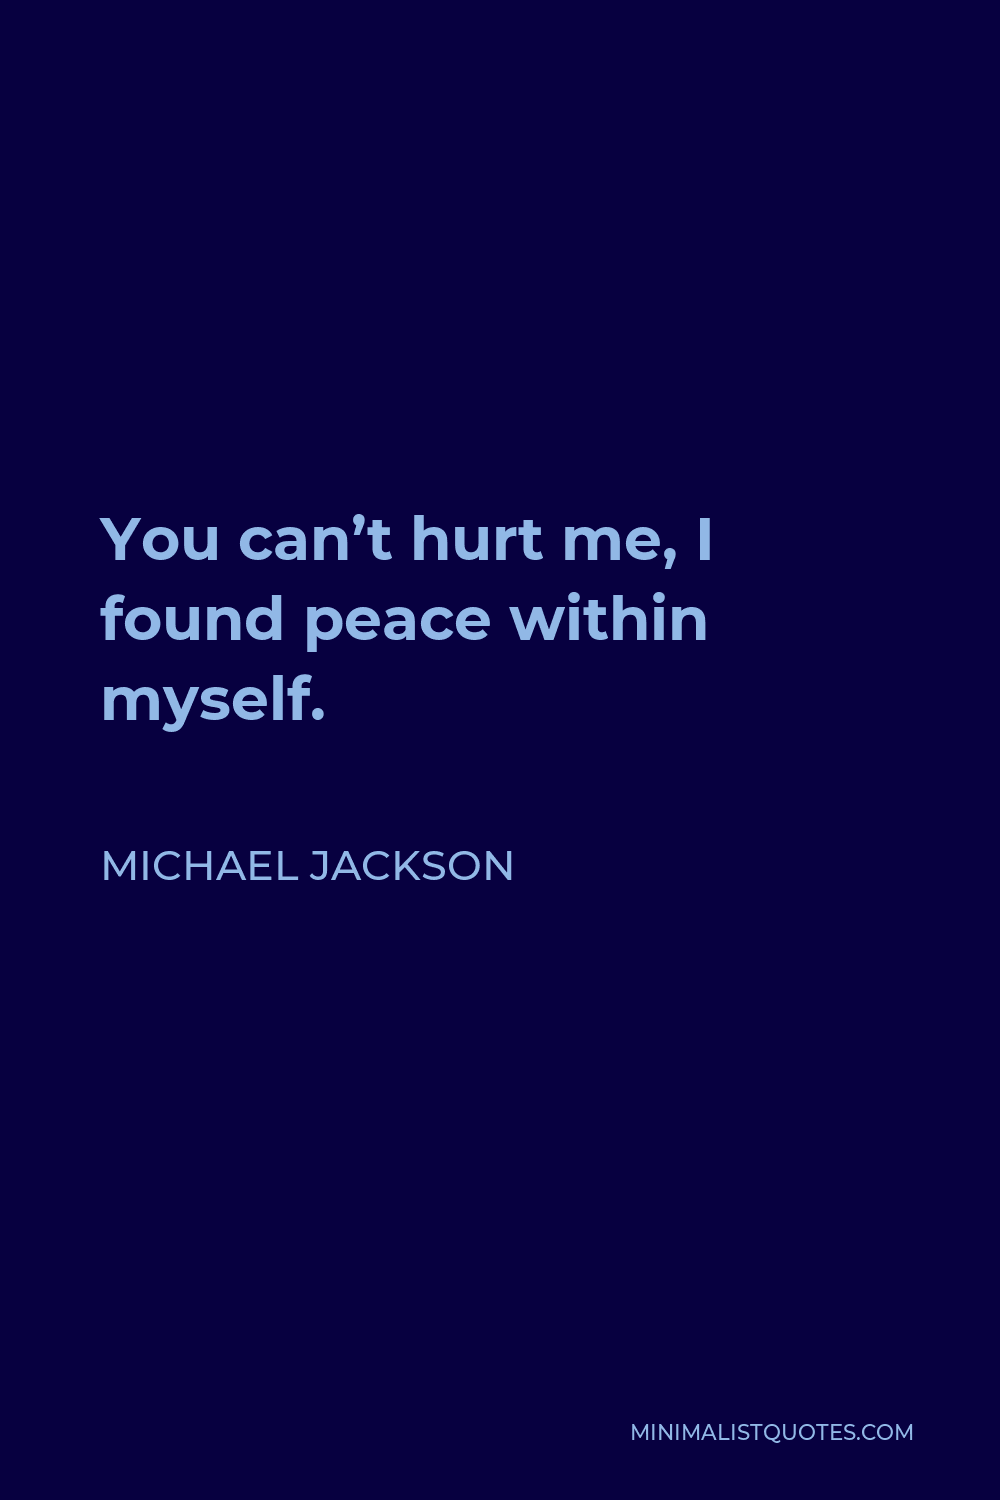 Michael Jackson Quote - You can’t hurt me, I found peace within myself.